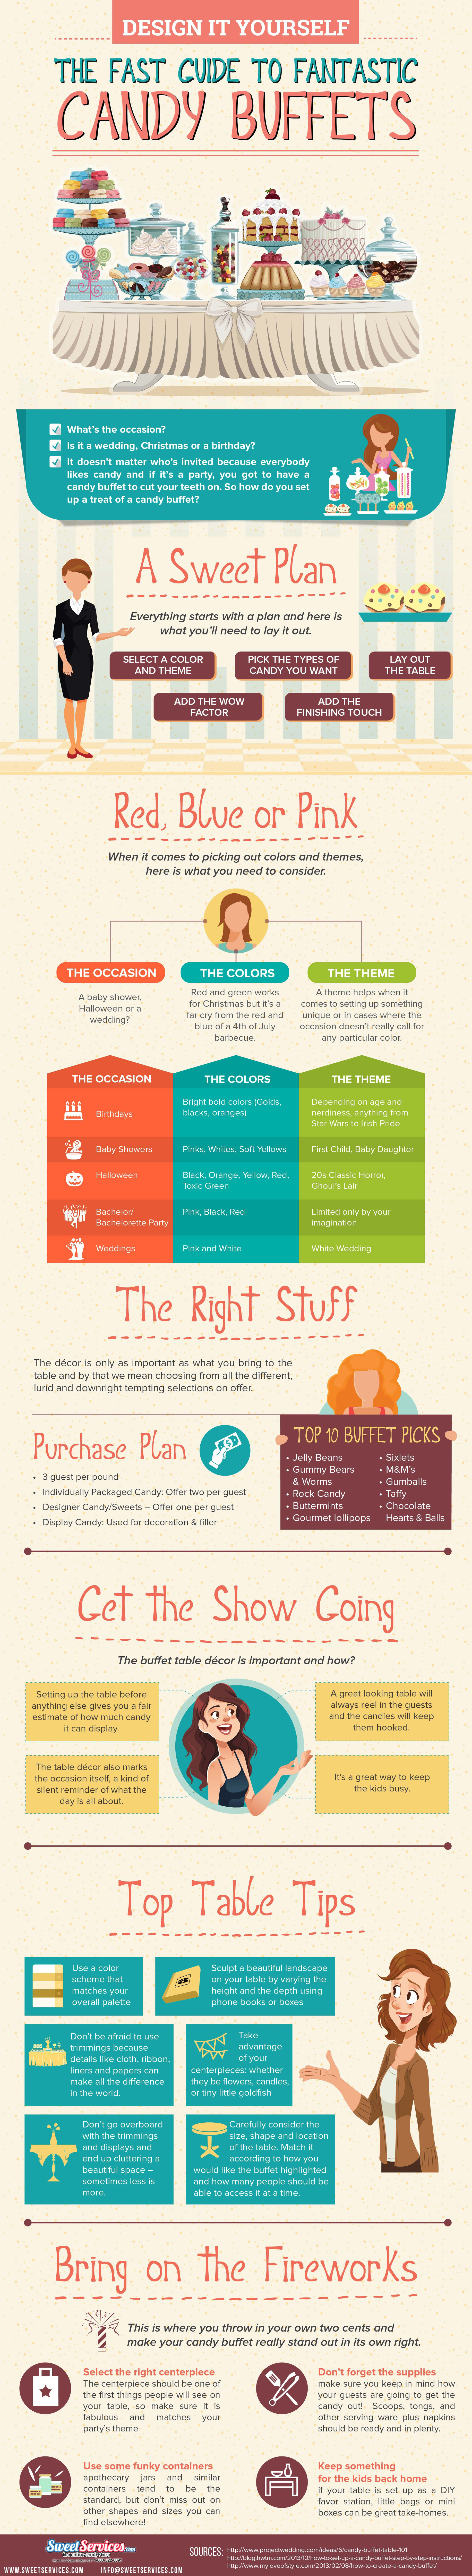 Sweet Services fast Guide to DIY Candy Buffet infographic